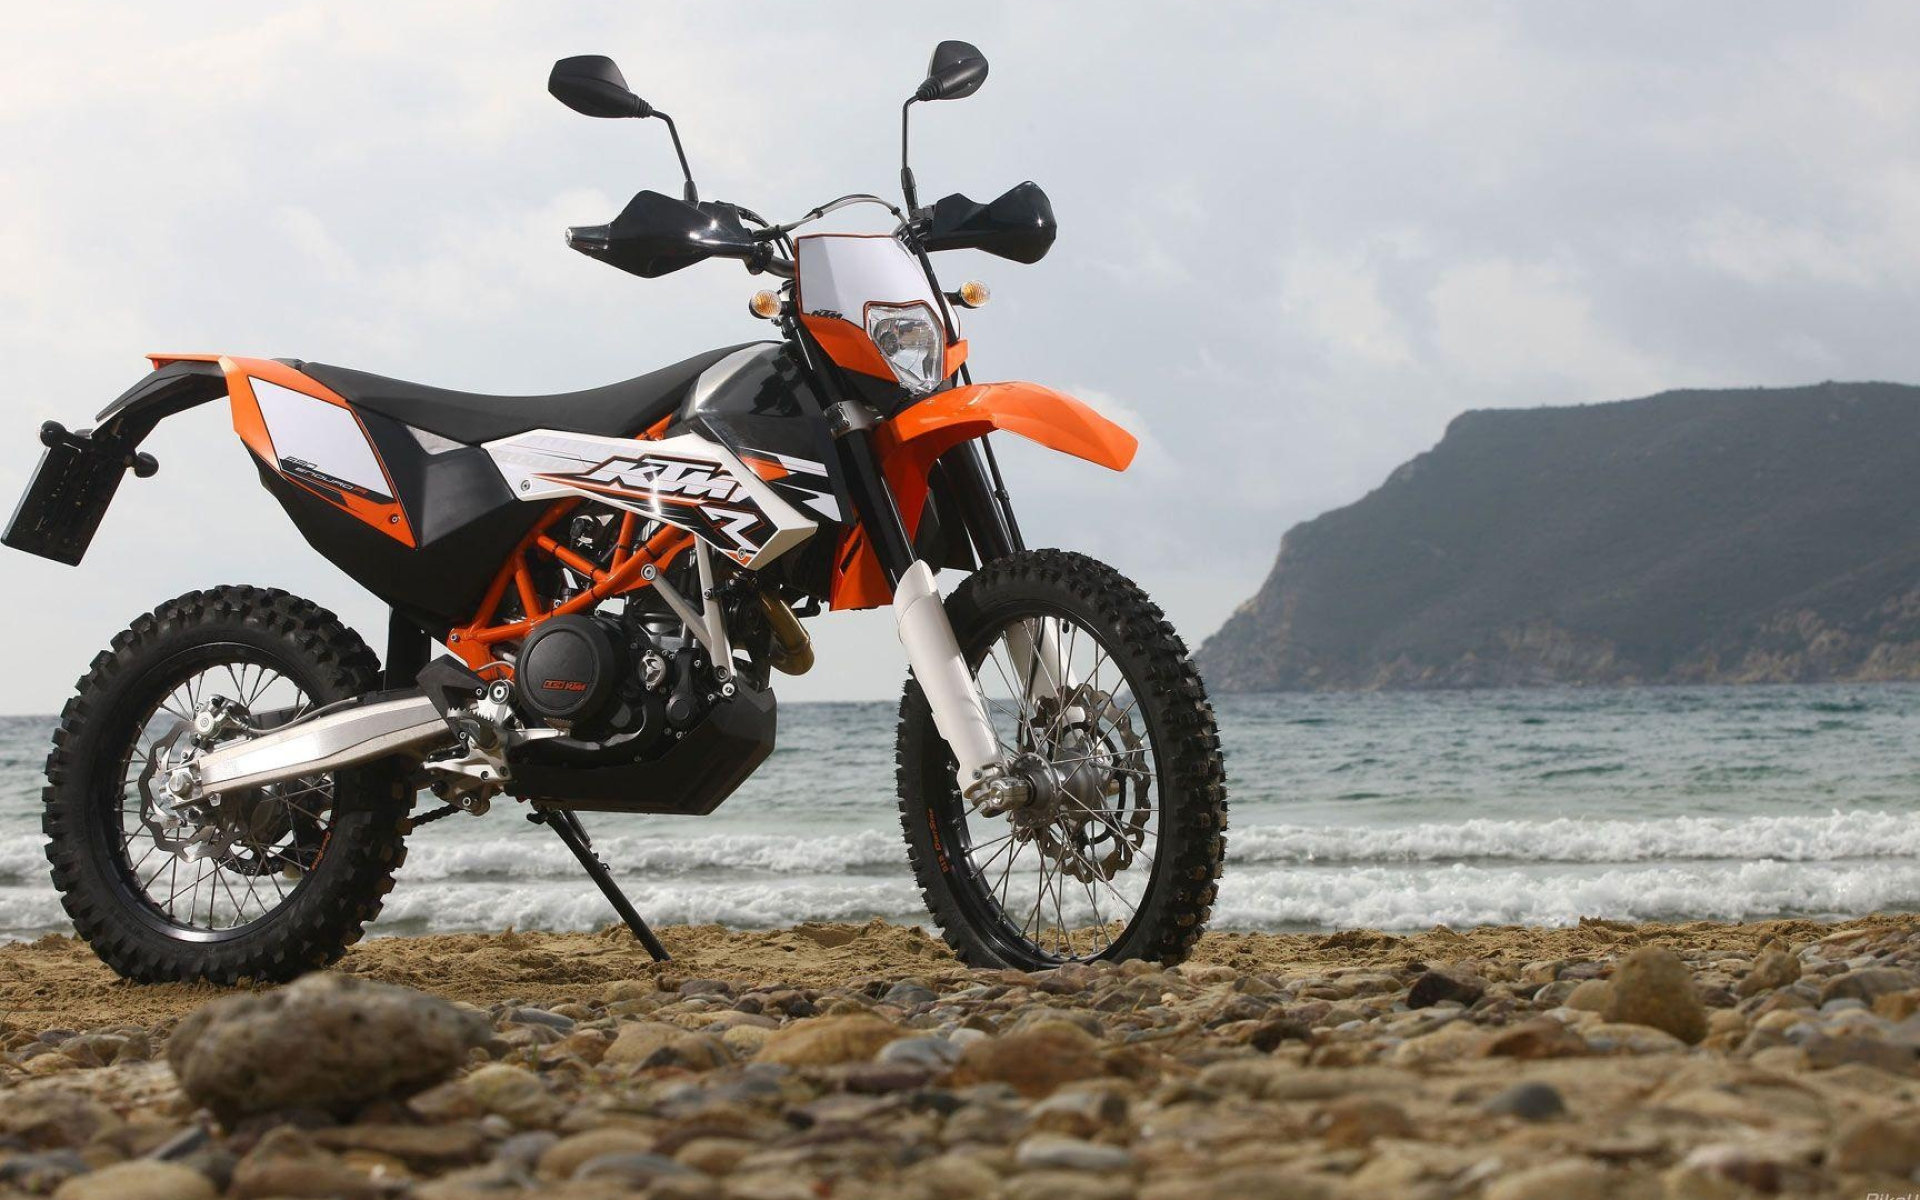 Enduro Motorbike: KTM 690 R, Wide Back Tire, Reinforced Suspension, Designed Specifically For Off-Road Driving, 2009. 1920x1200 HD Wallpaper.